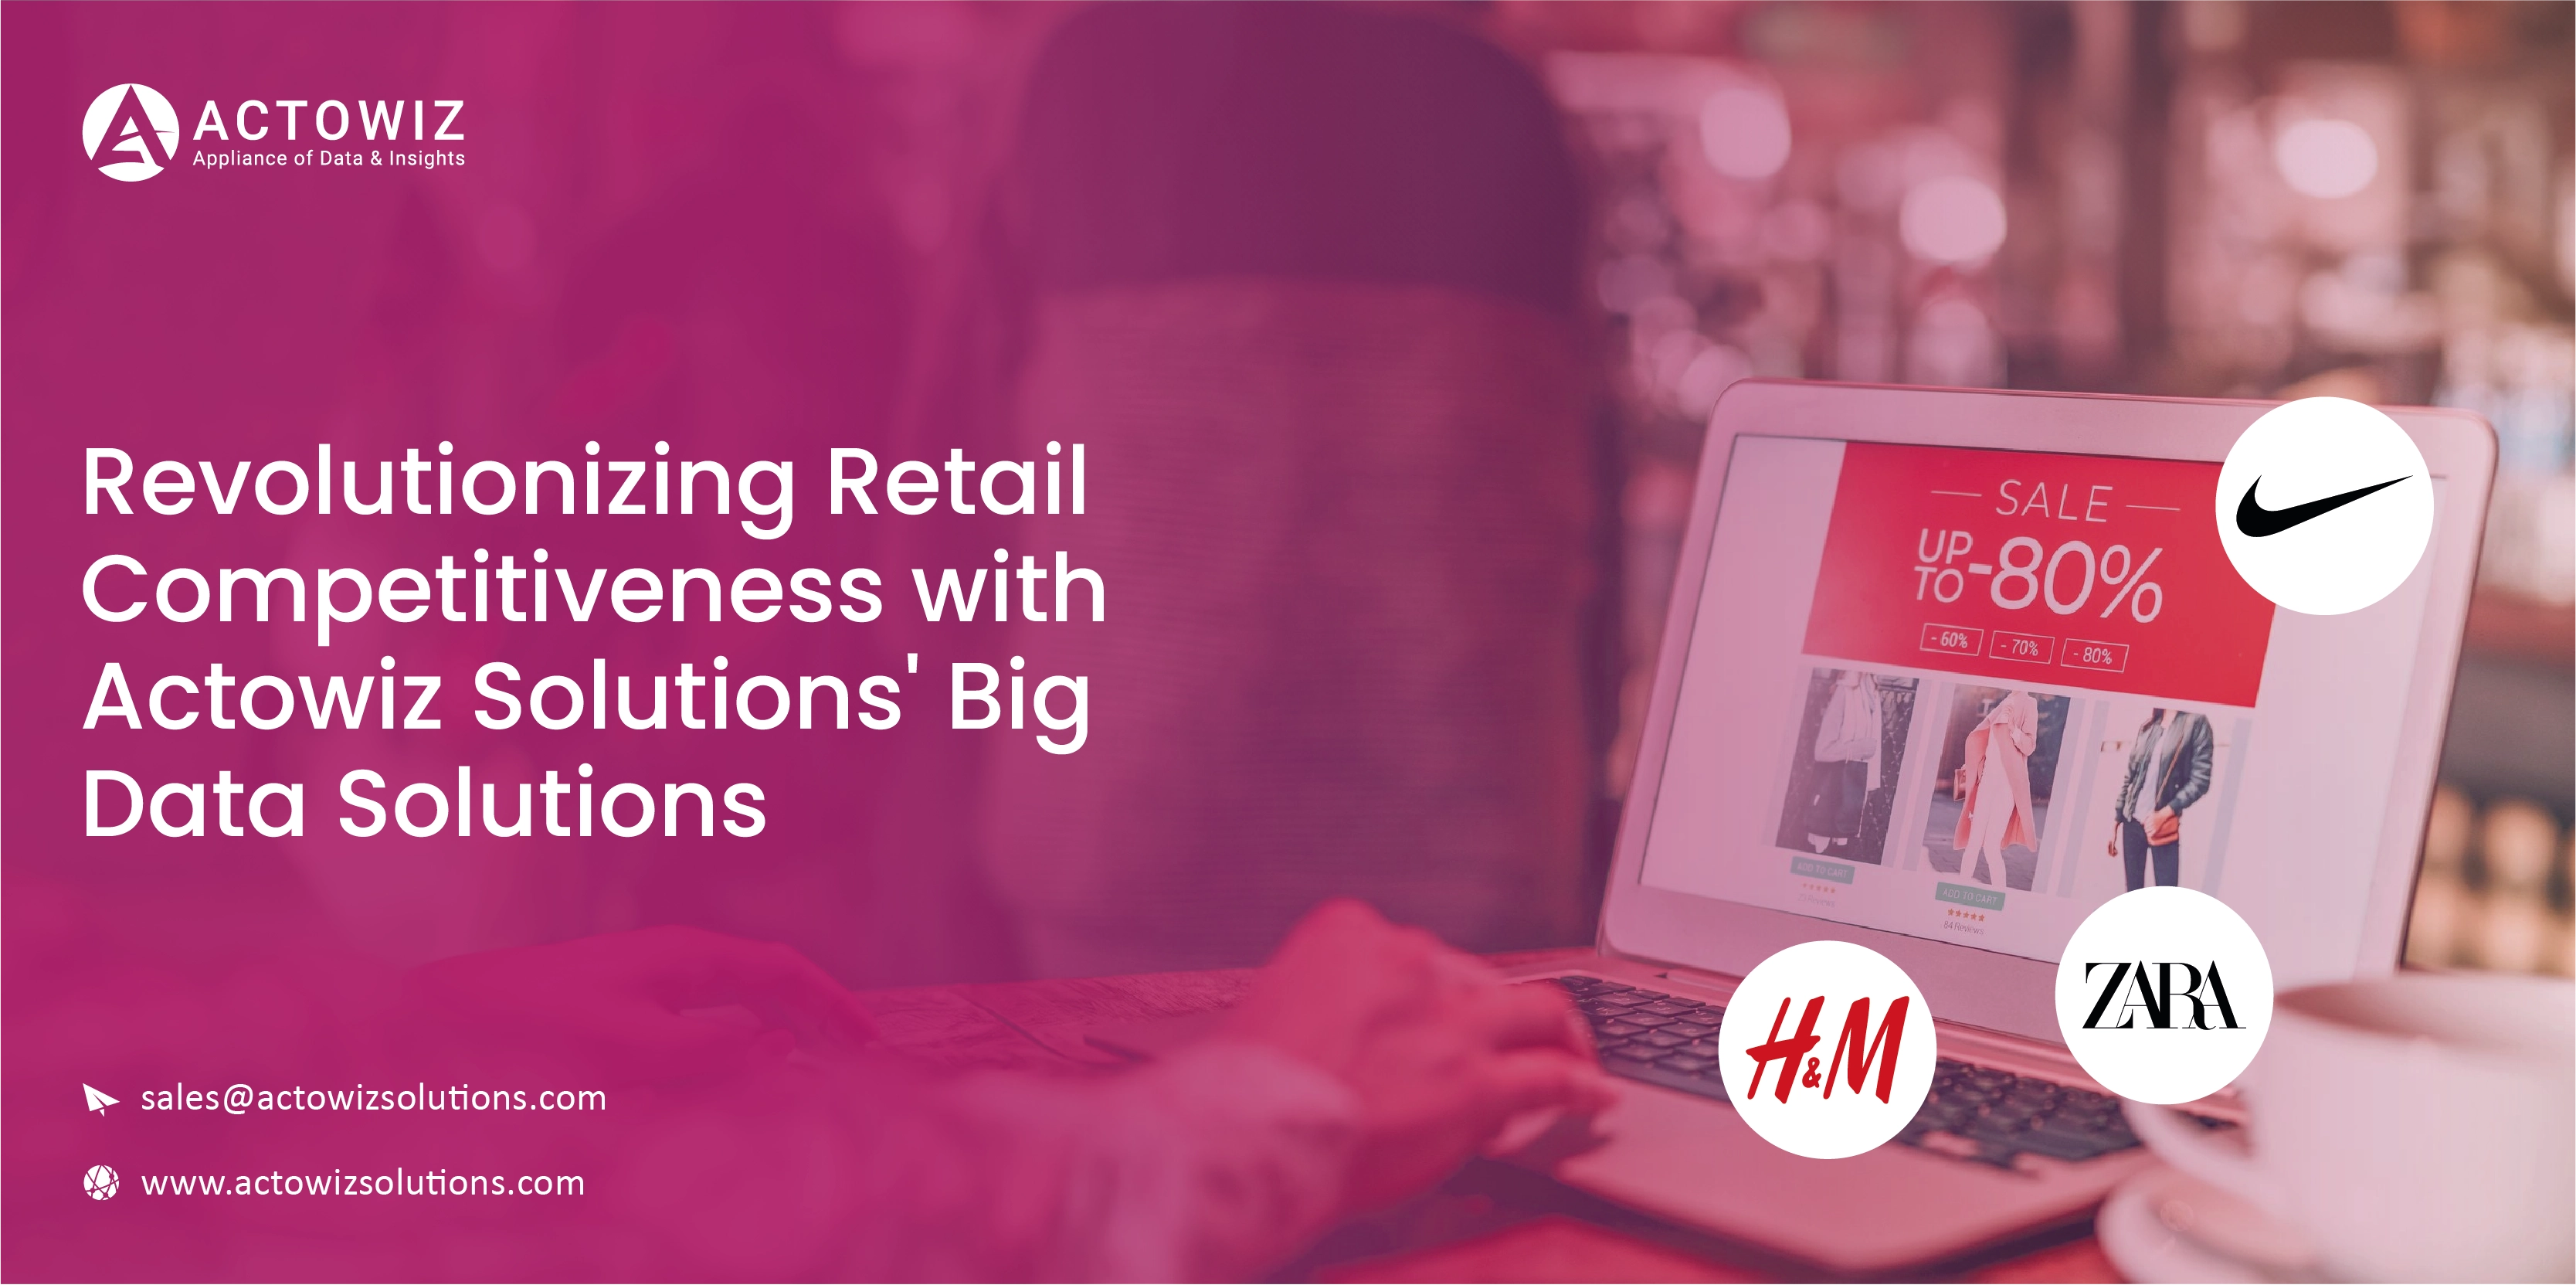 Revolutionizing-Retail-Competitiveness-with-Actowiz-Solutions-Big-Data-Solutions